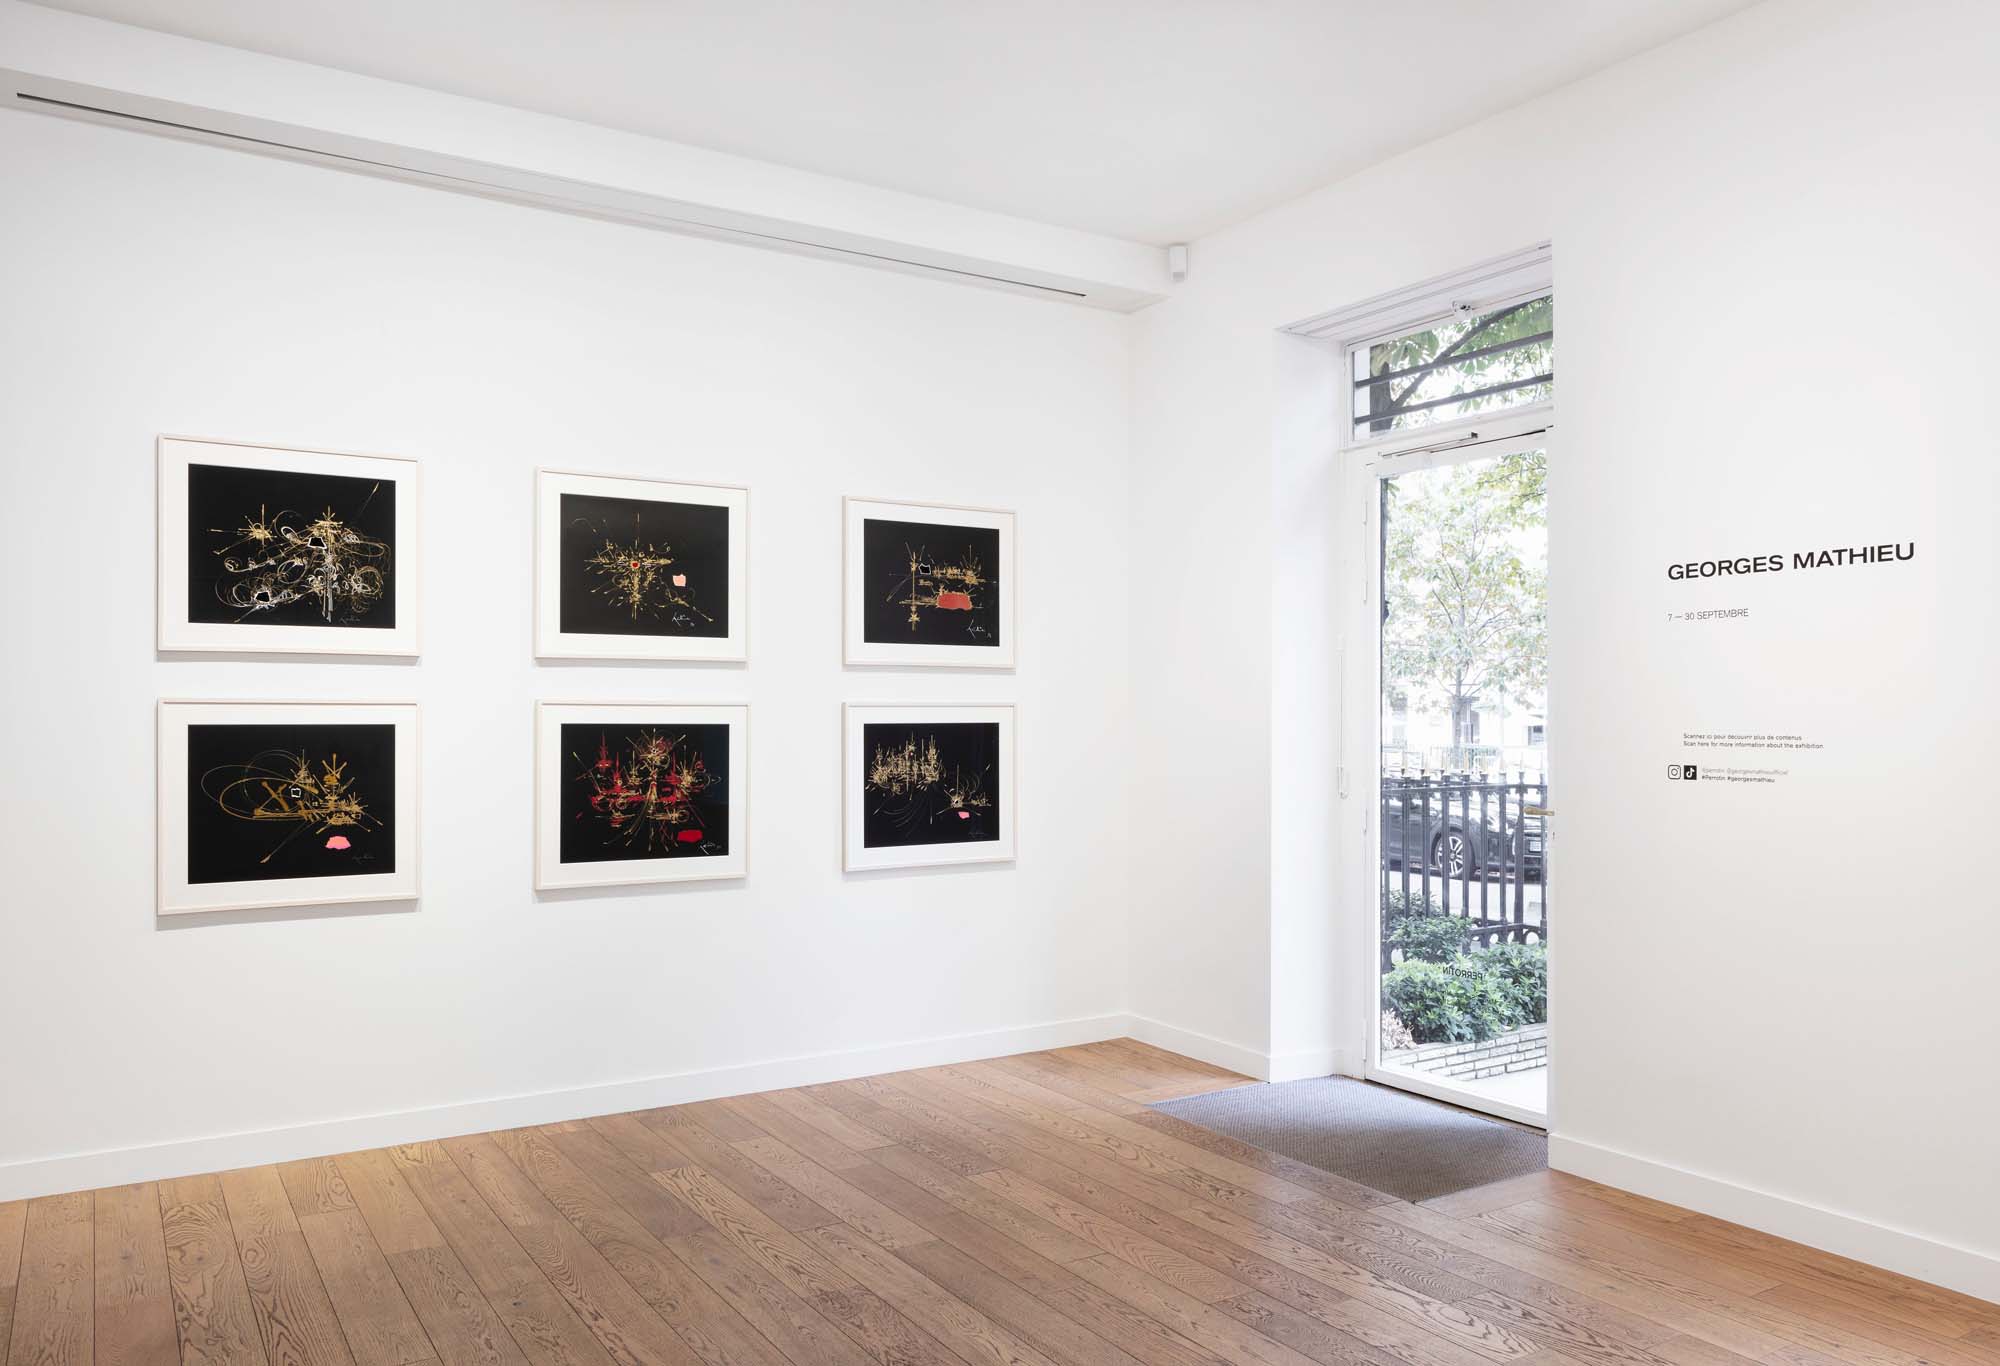 Installation image for Georges Mathieu, at Perrotin